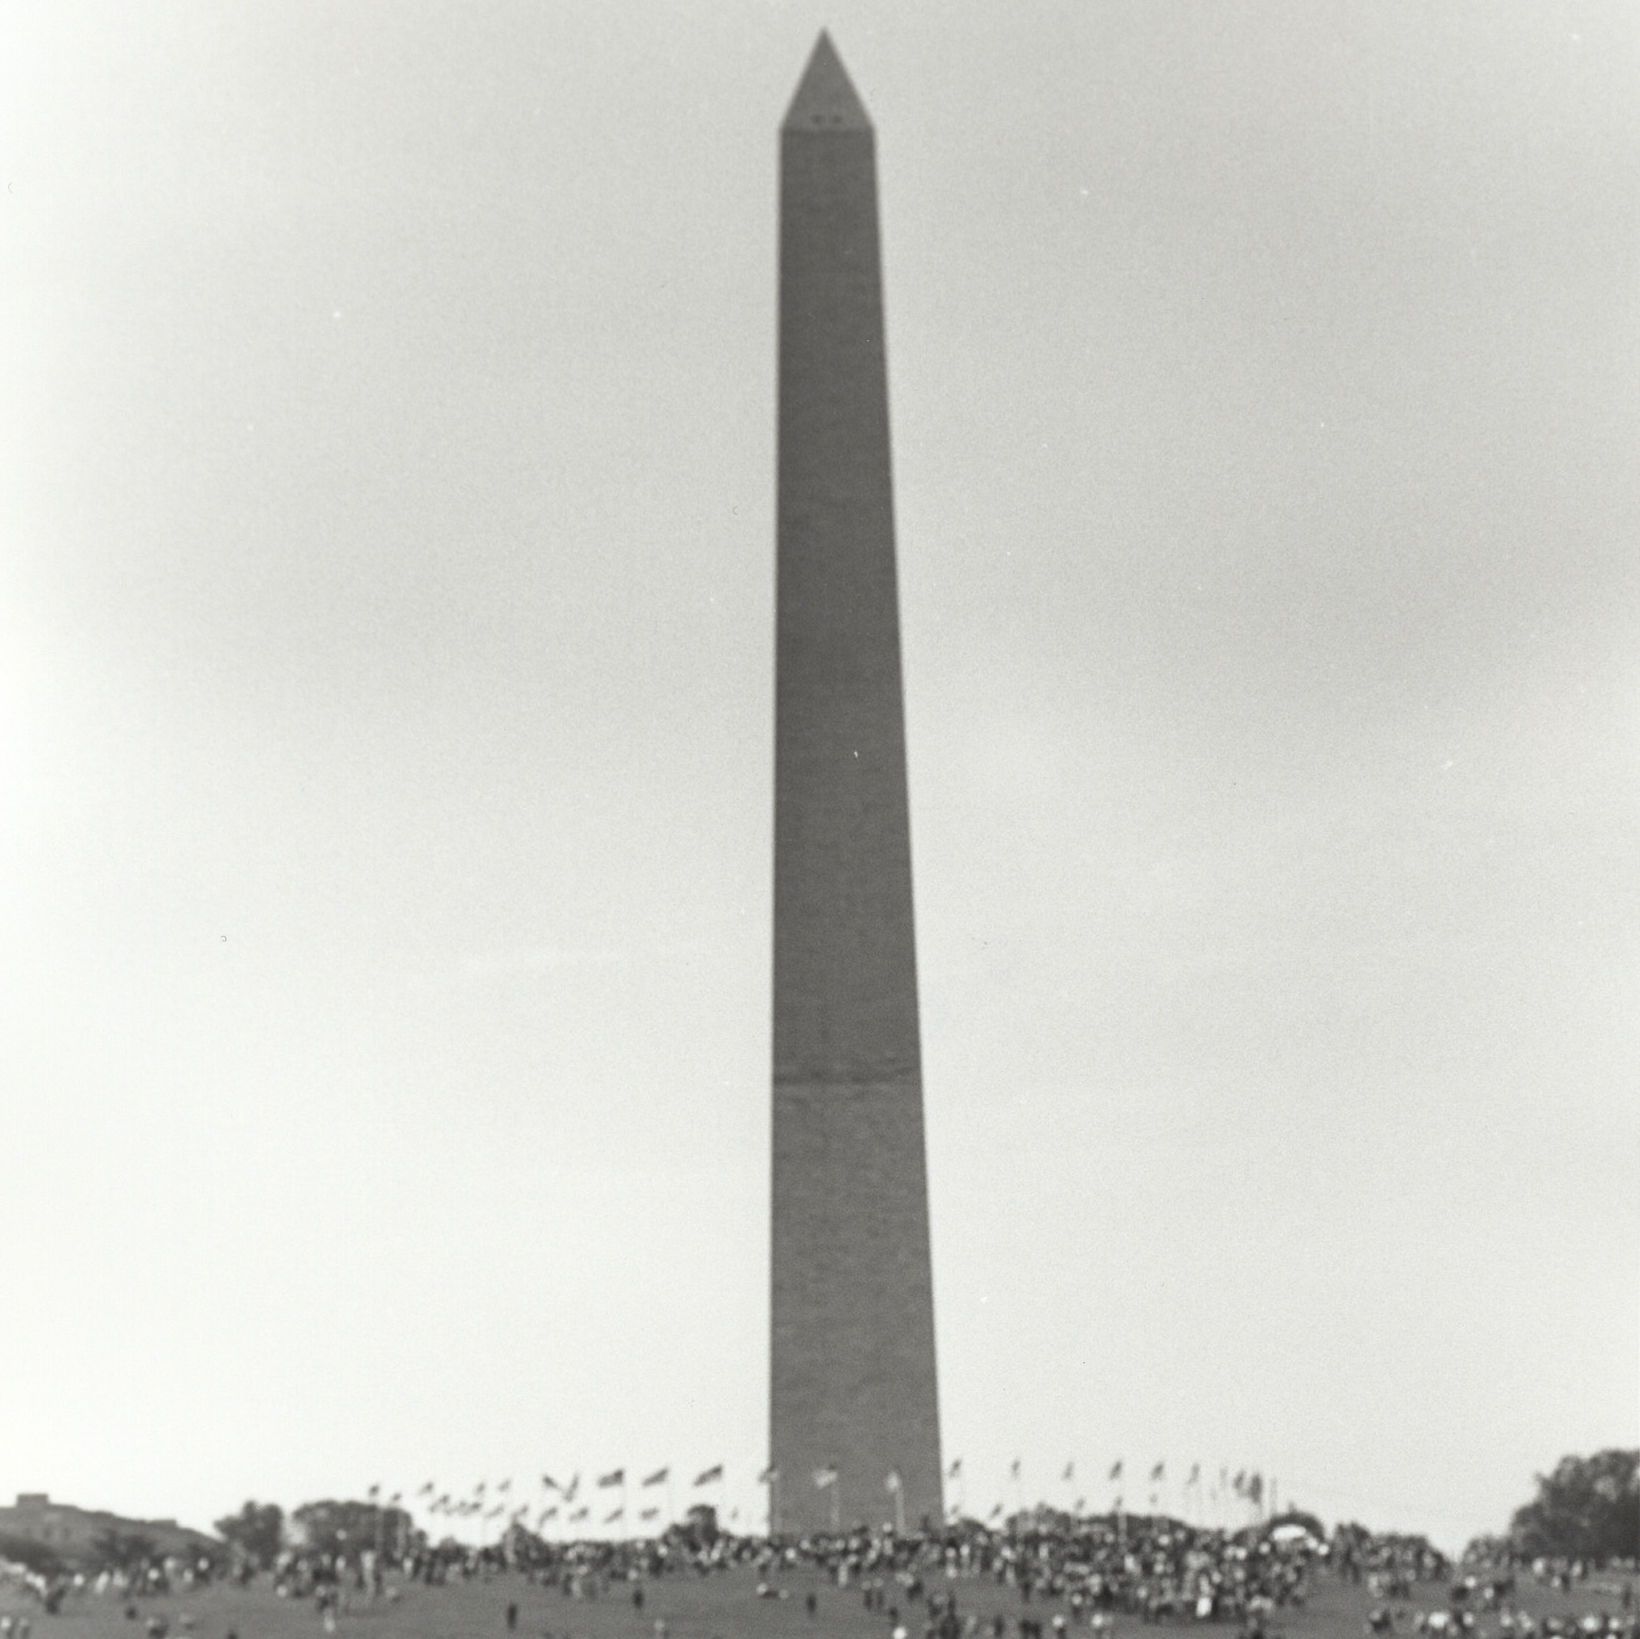 Photograph of Crowd at the Washington Monument during the March on Washington